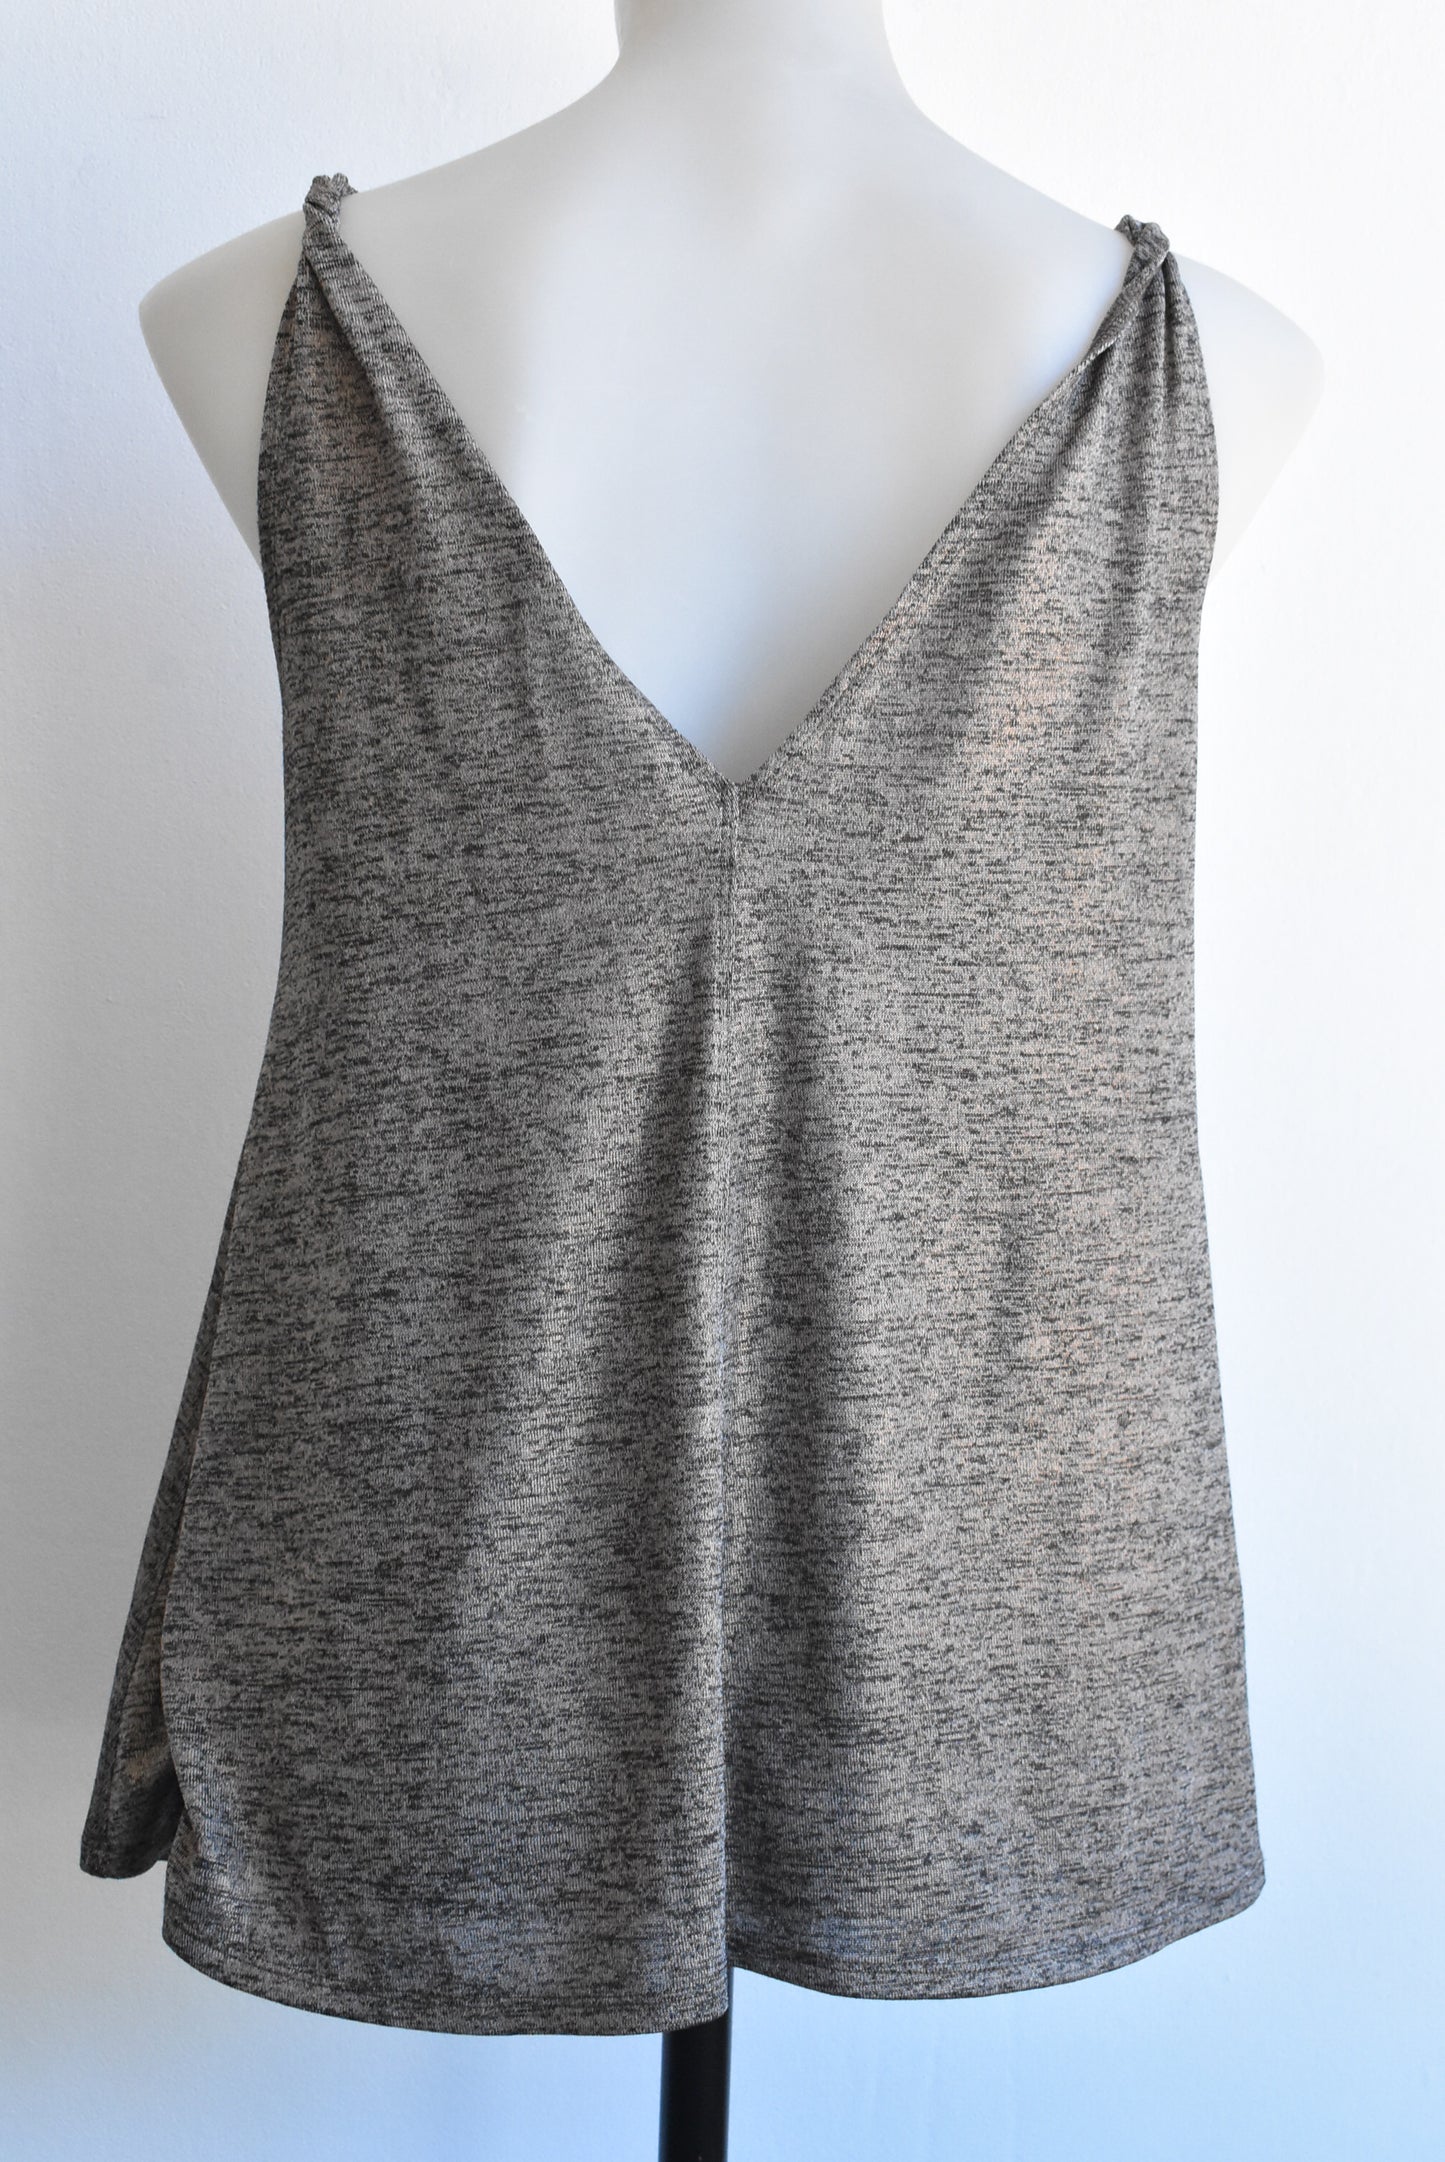 Liam cool brown tank top, size 8